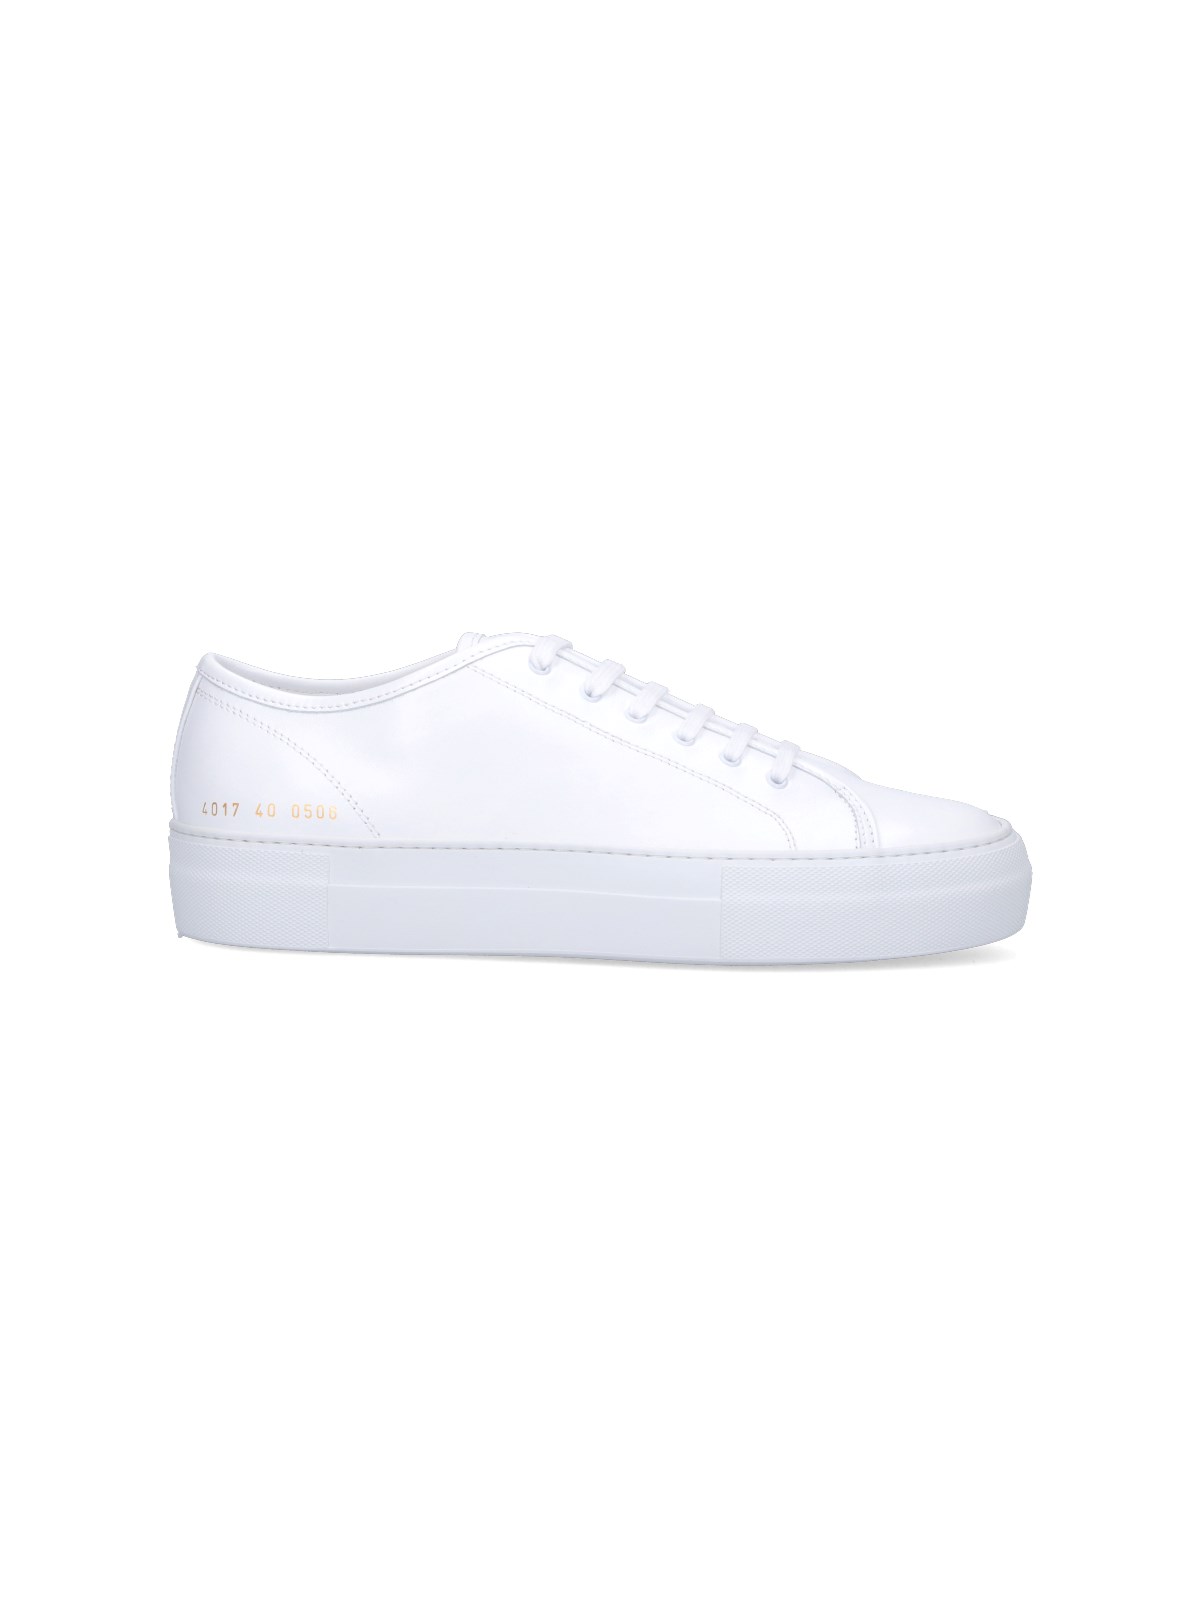 COMMON PROJECTS SNEAKERS 'TOURNAMENT'